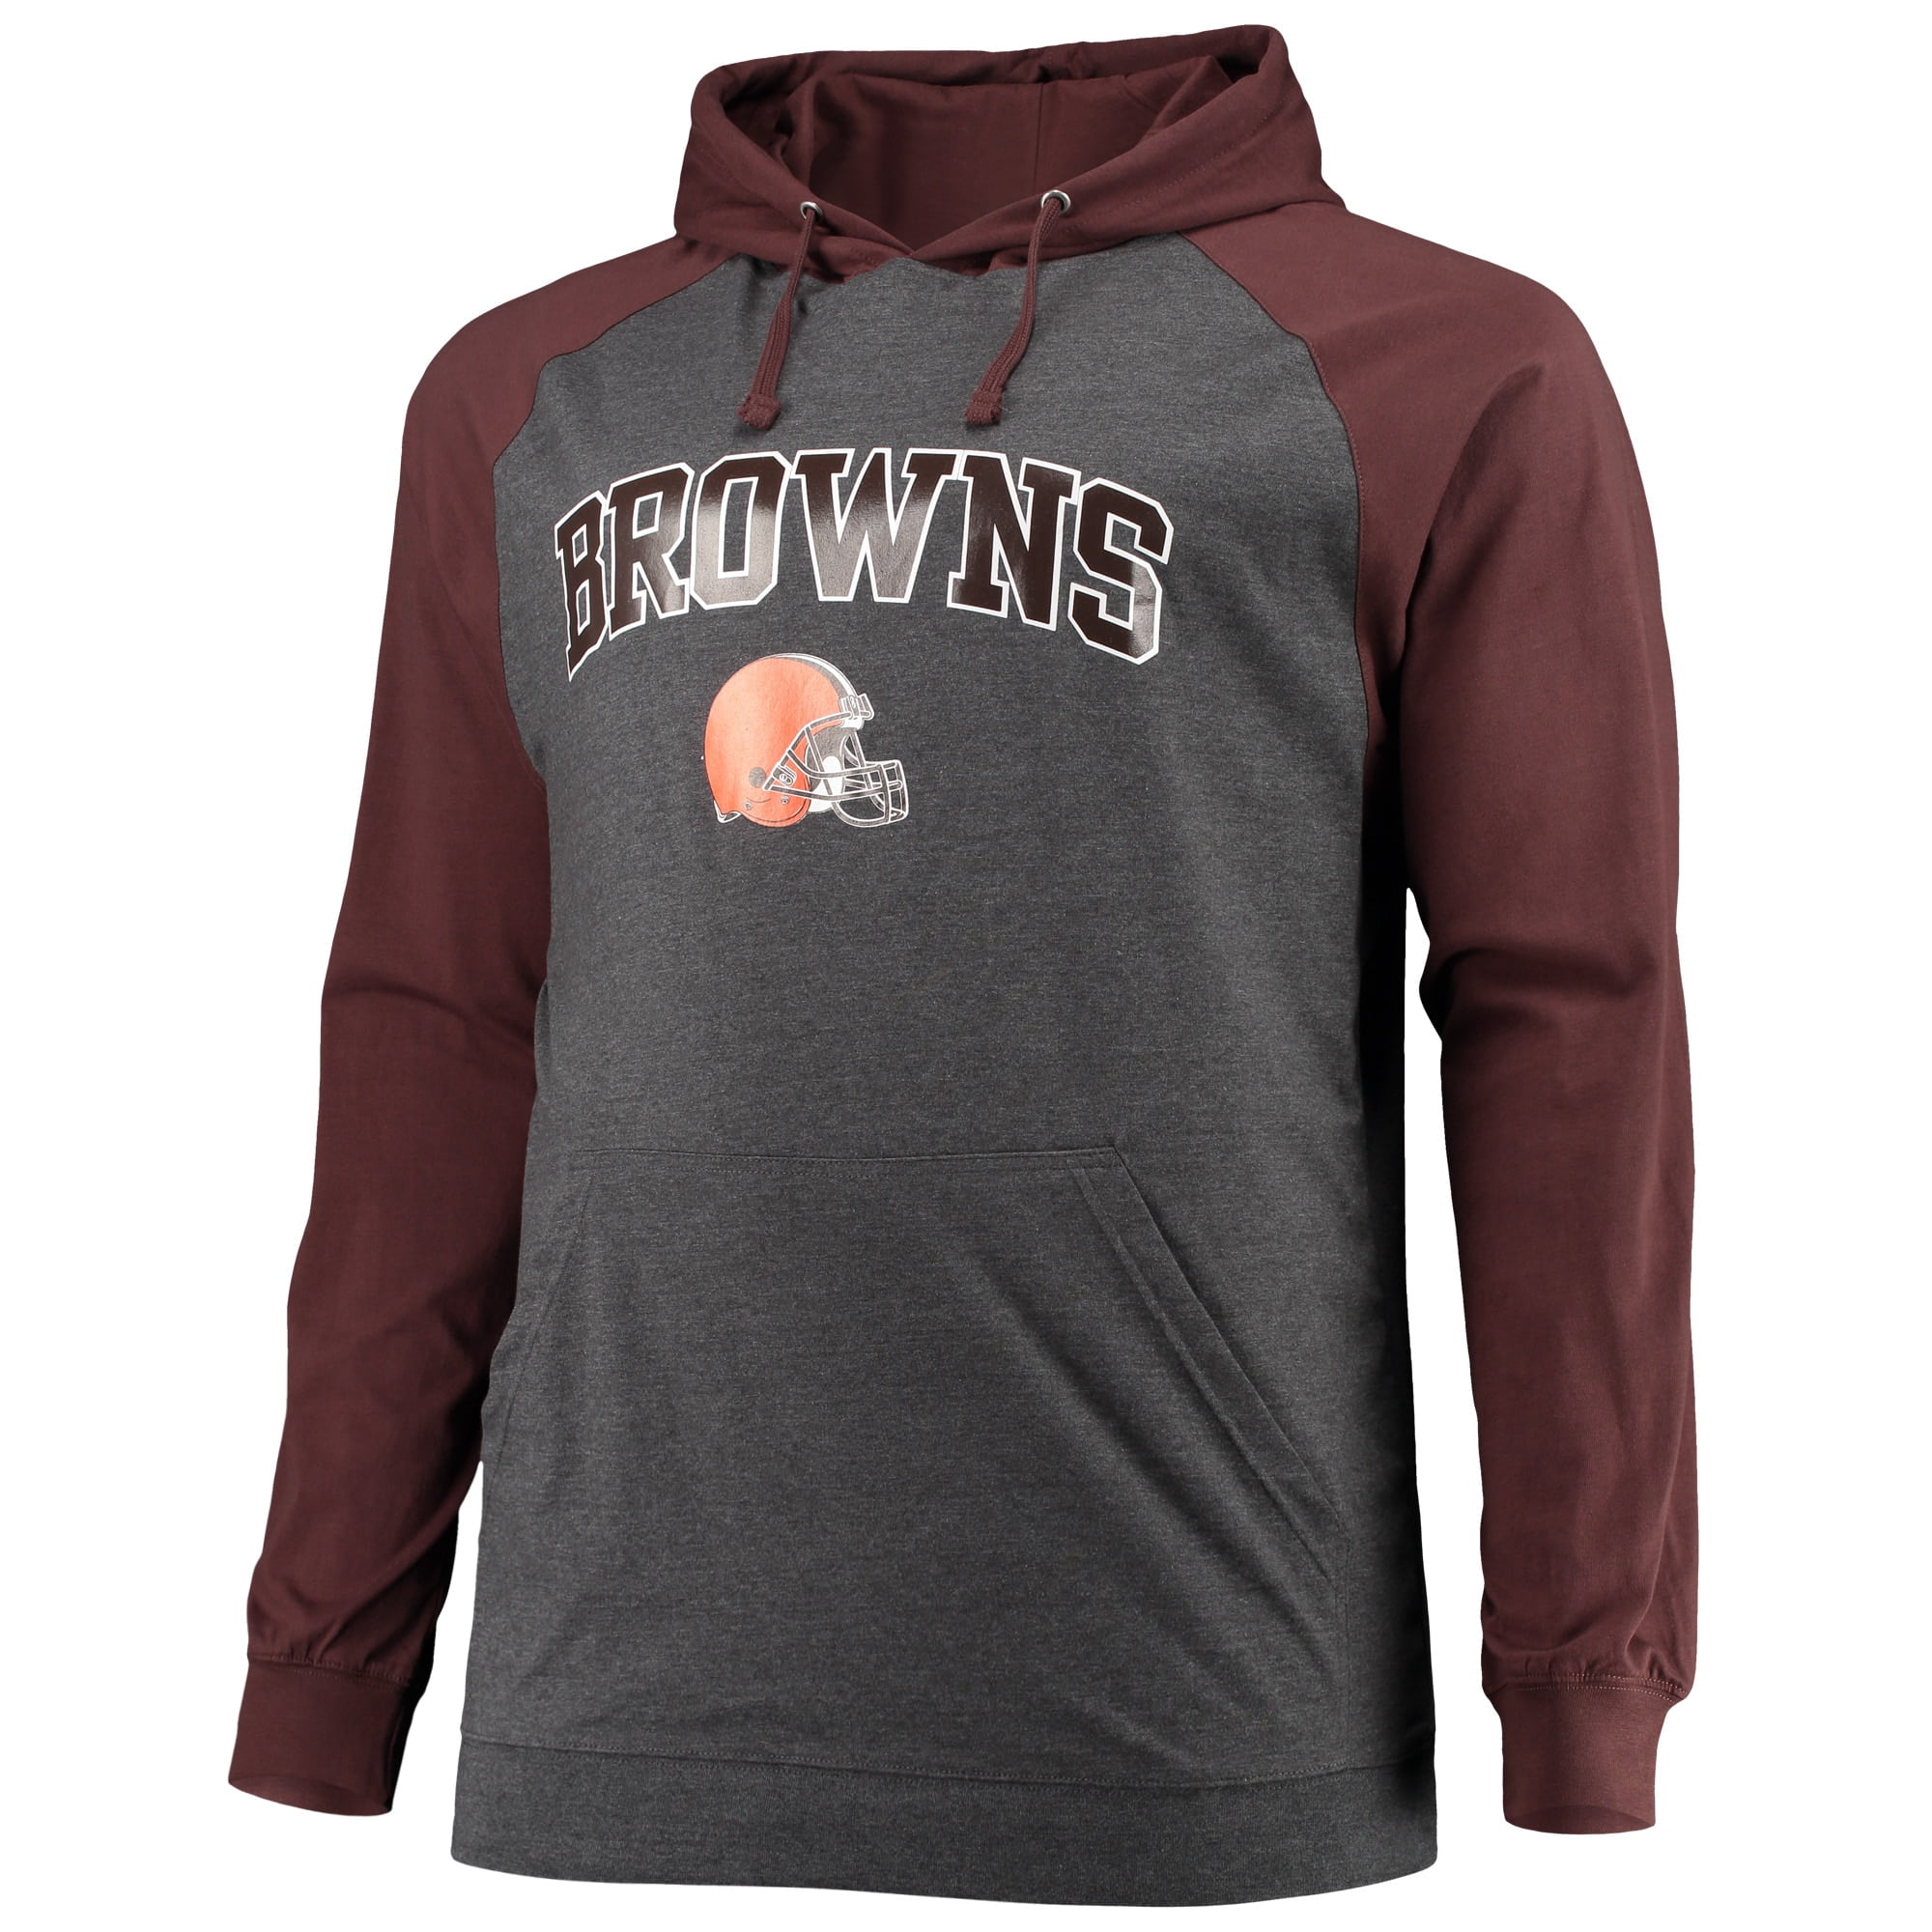 Men's Fanatics Branded Brown/Heathered Charcoal Cleveland Browns Big & Tall  Lightweight Raglan Pullover Hoodie 